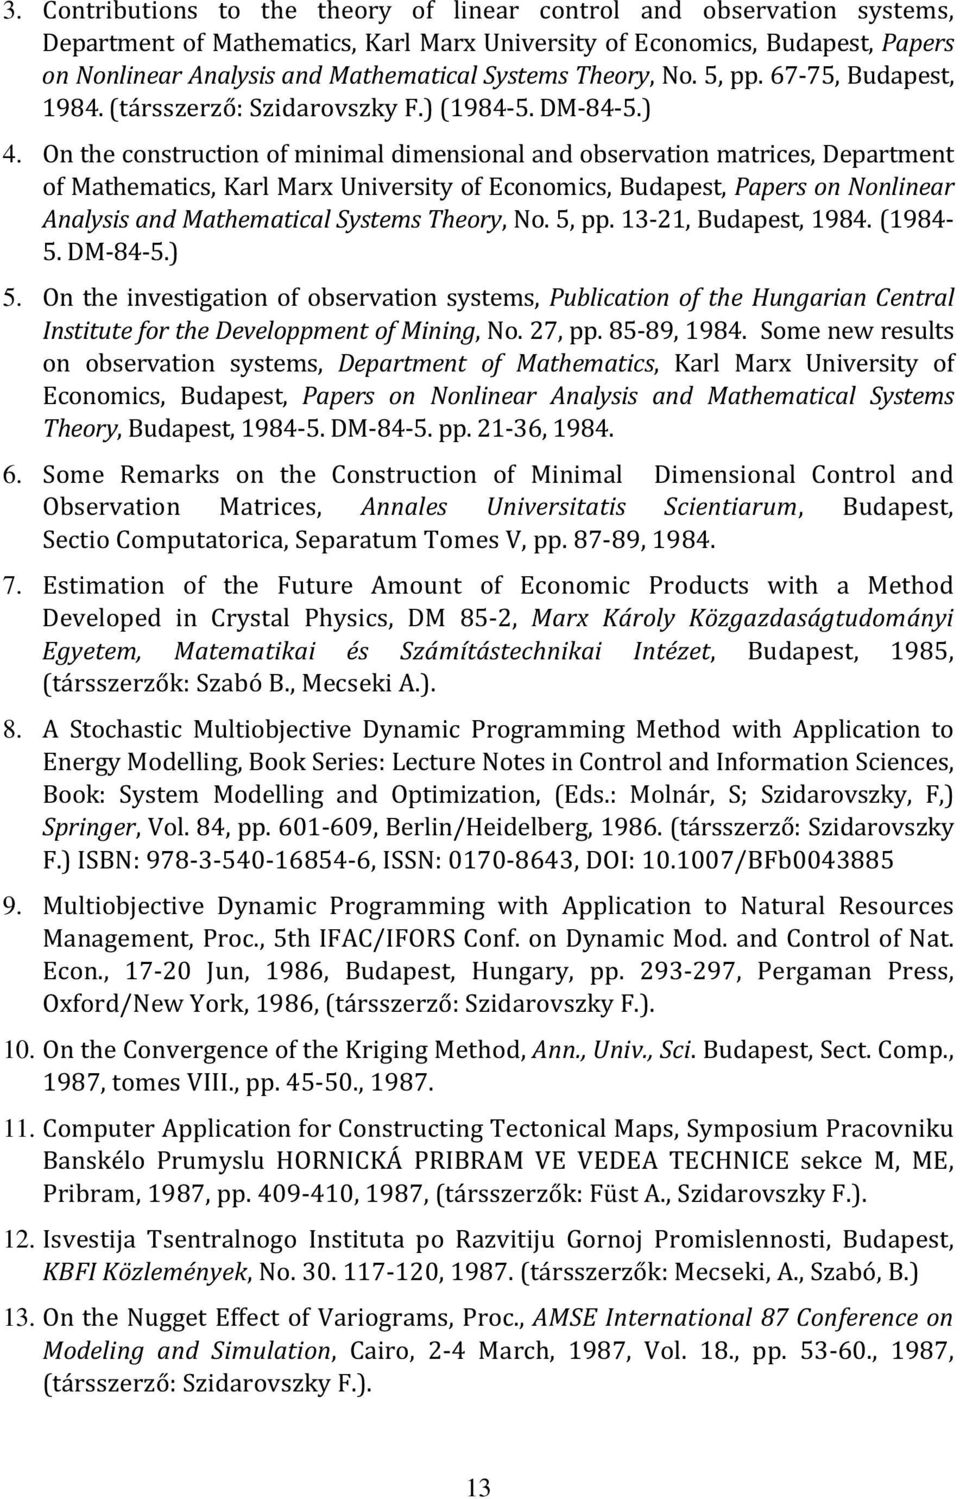 On the construction of minimal dimensional and observation matrices, Department of Mathematics, Karl Marx University of Economics, Budapest, Papers on Nonlinear Analysis and Mathematical Systems